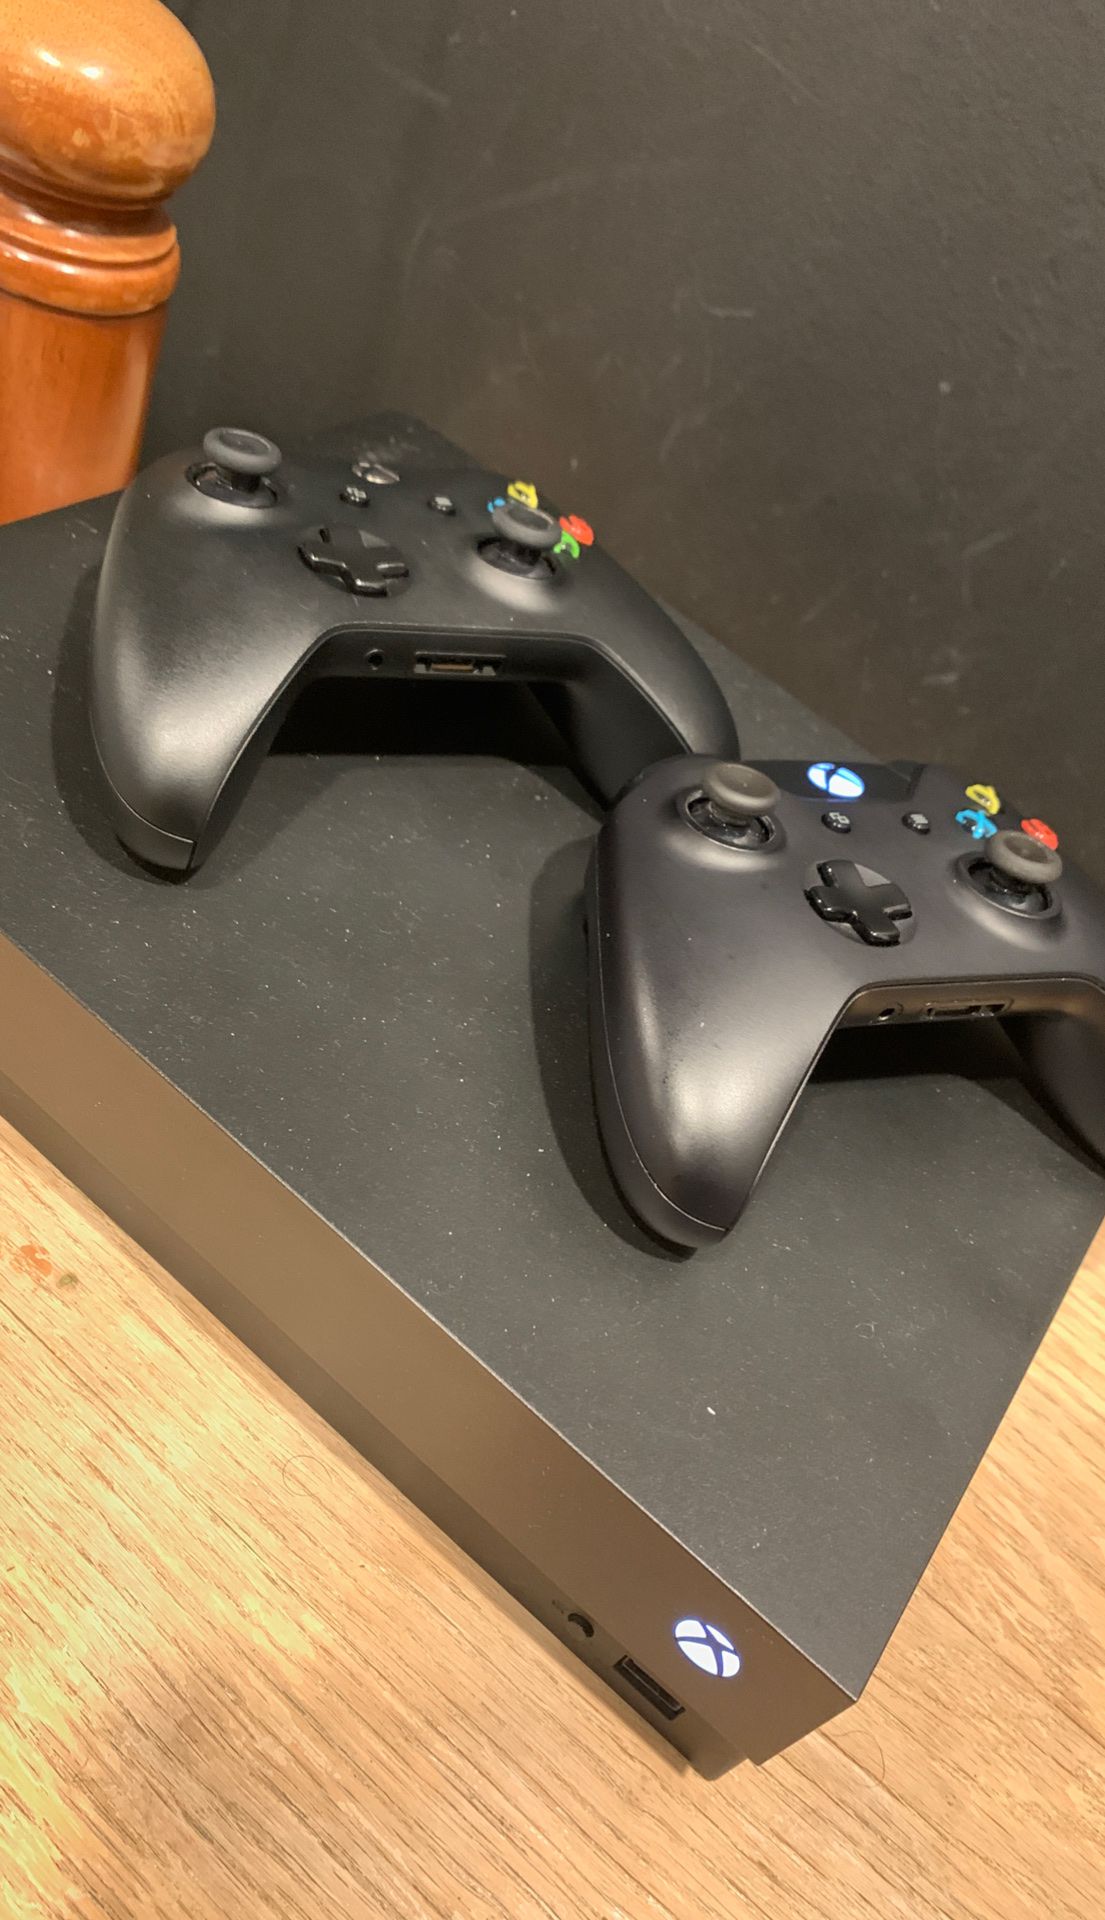 Xbox One X + 2 controllers